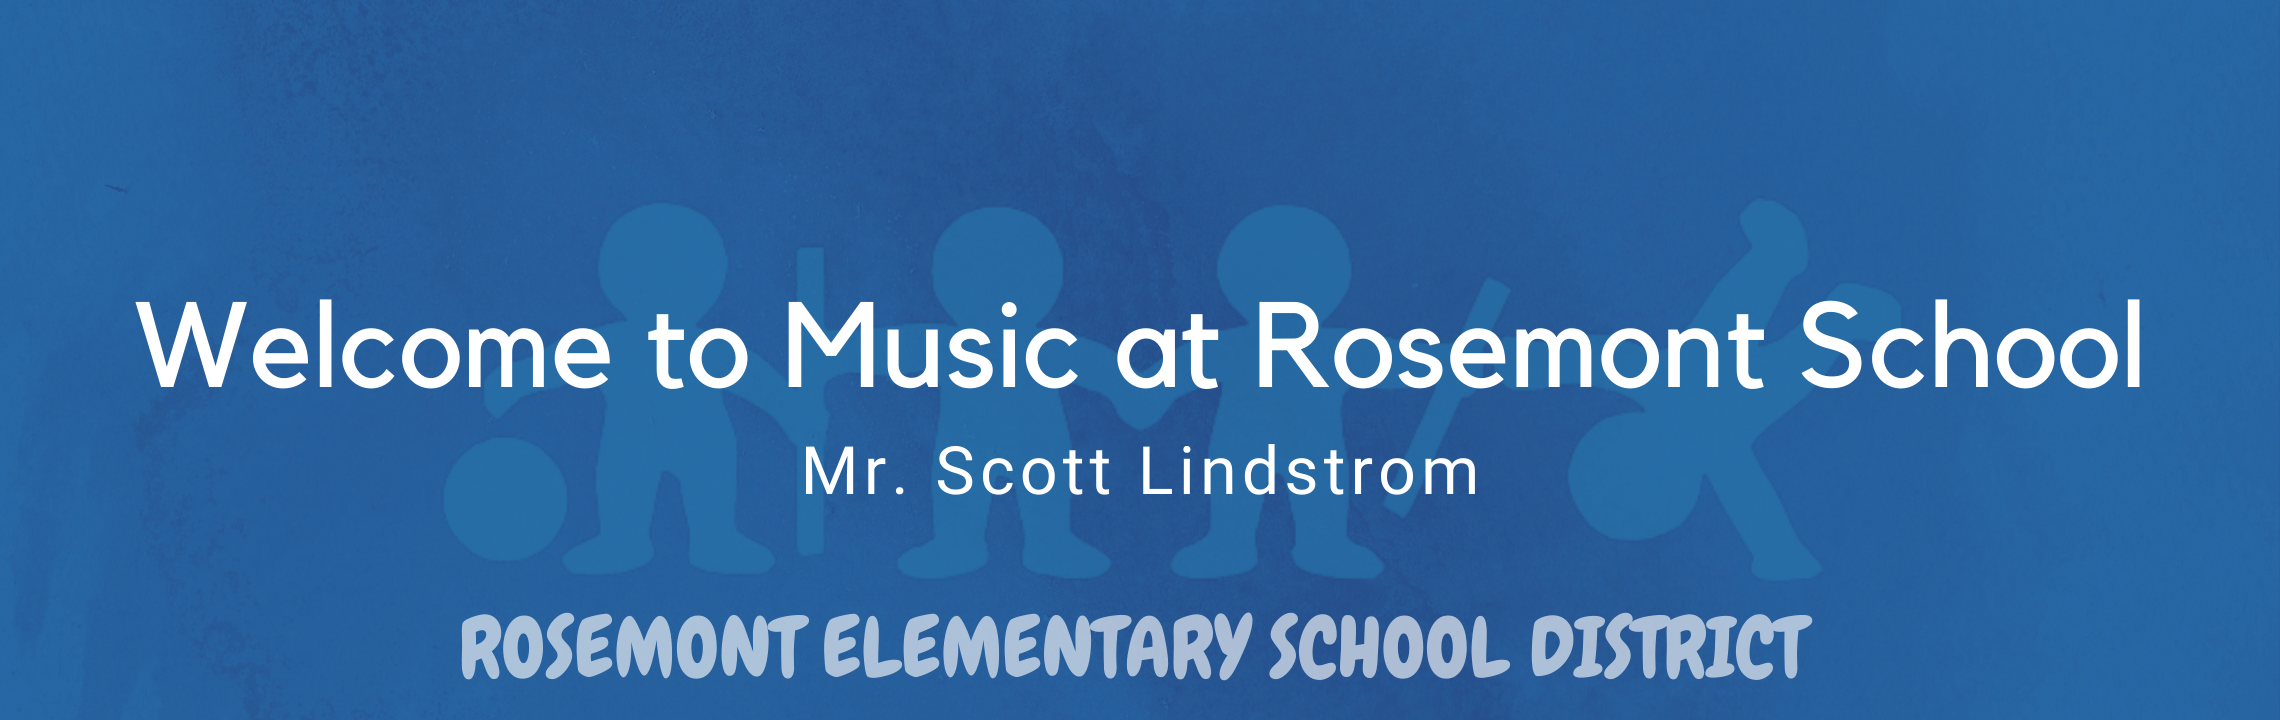 Welcome to Music at Rosemont School! Mr. Scott Lindstrom, Elementary School District